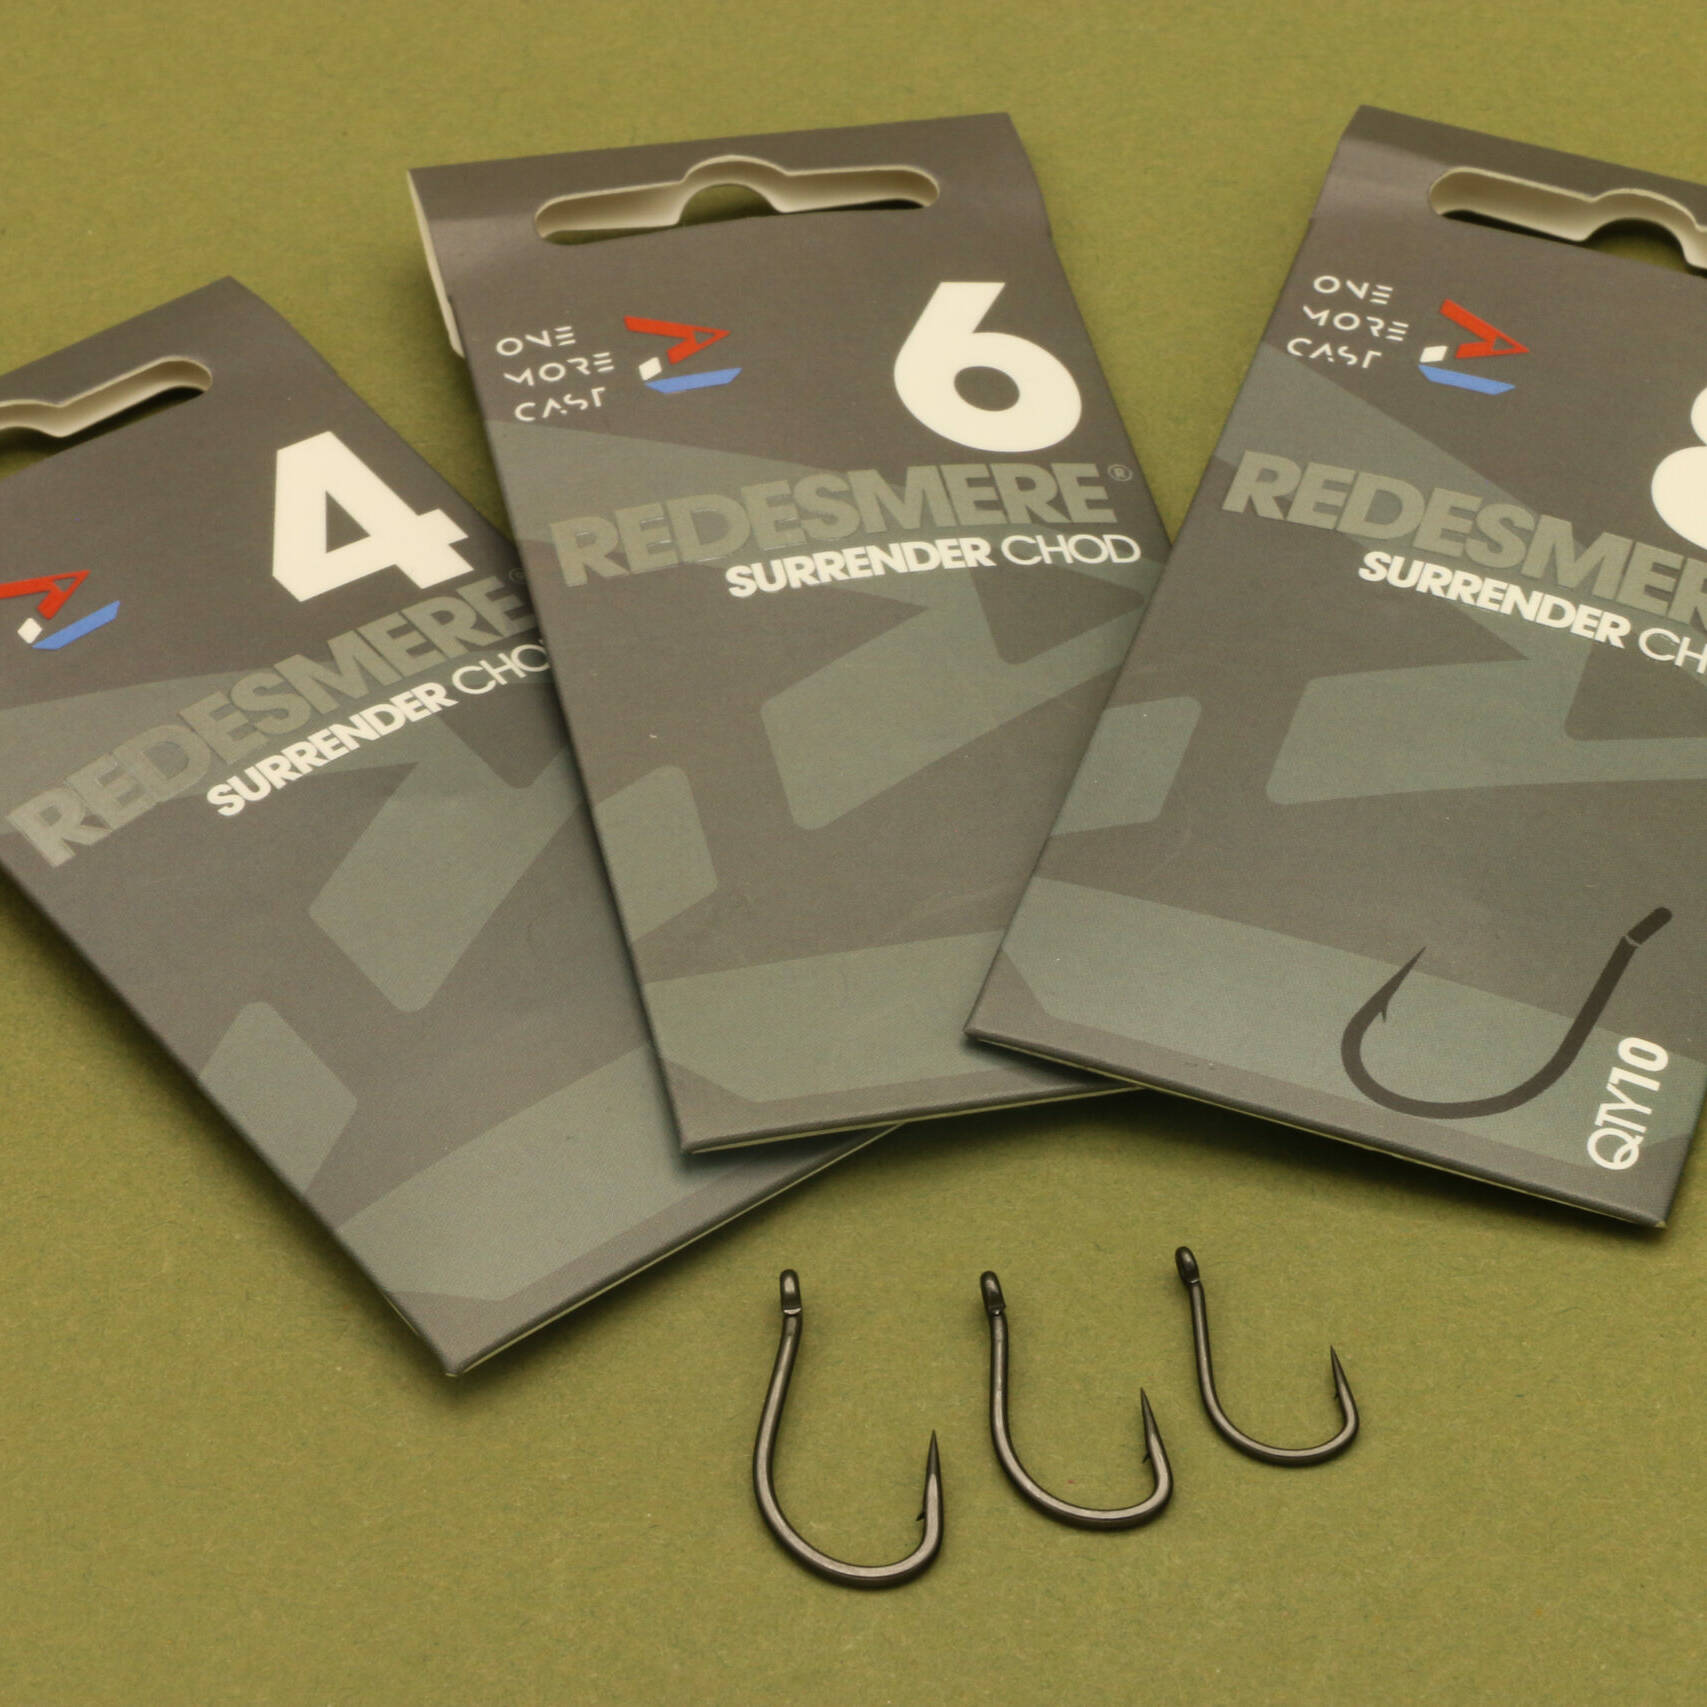 OMC REDESMERE Hooks (chod hook) Size 6